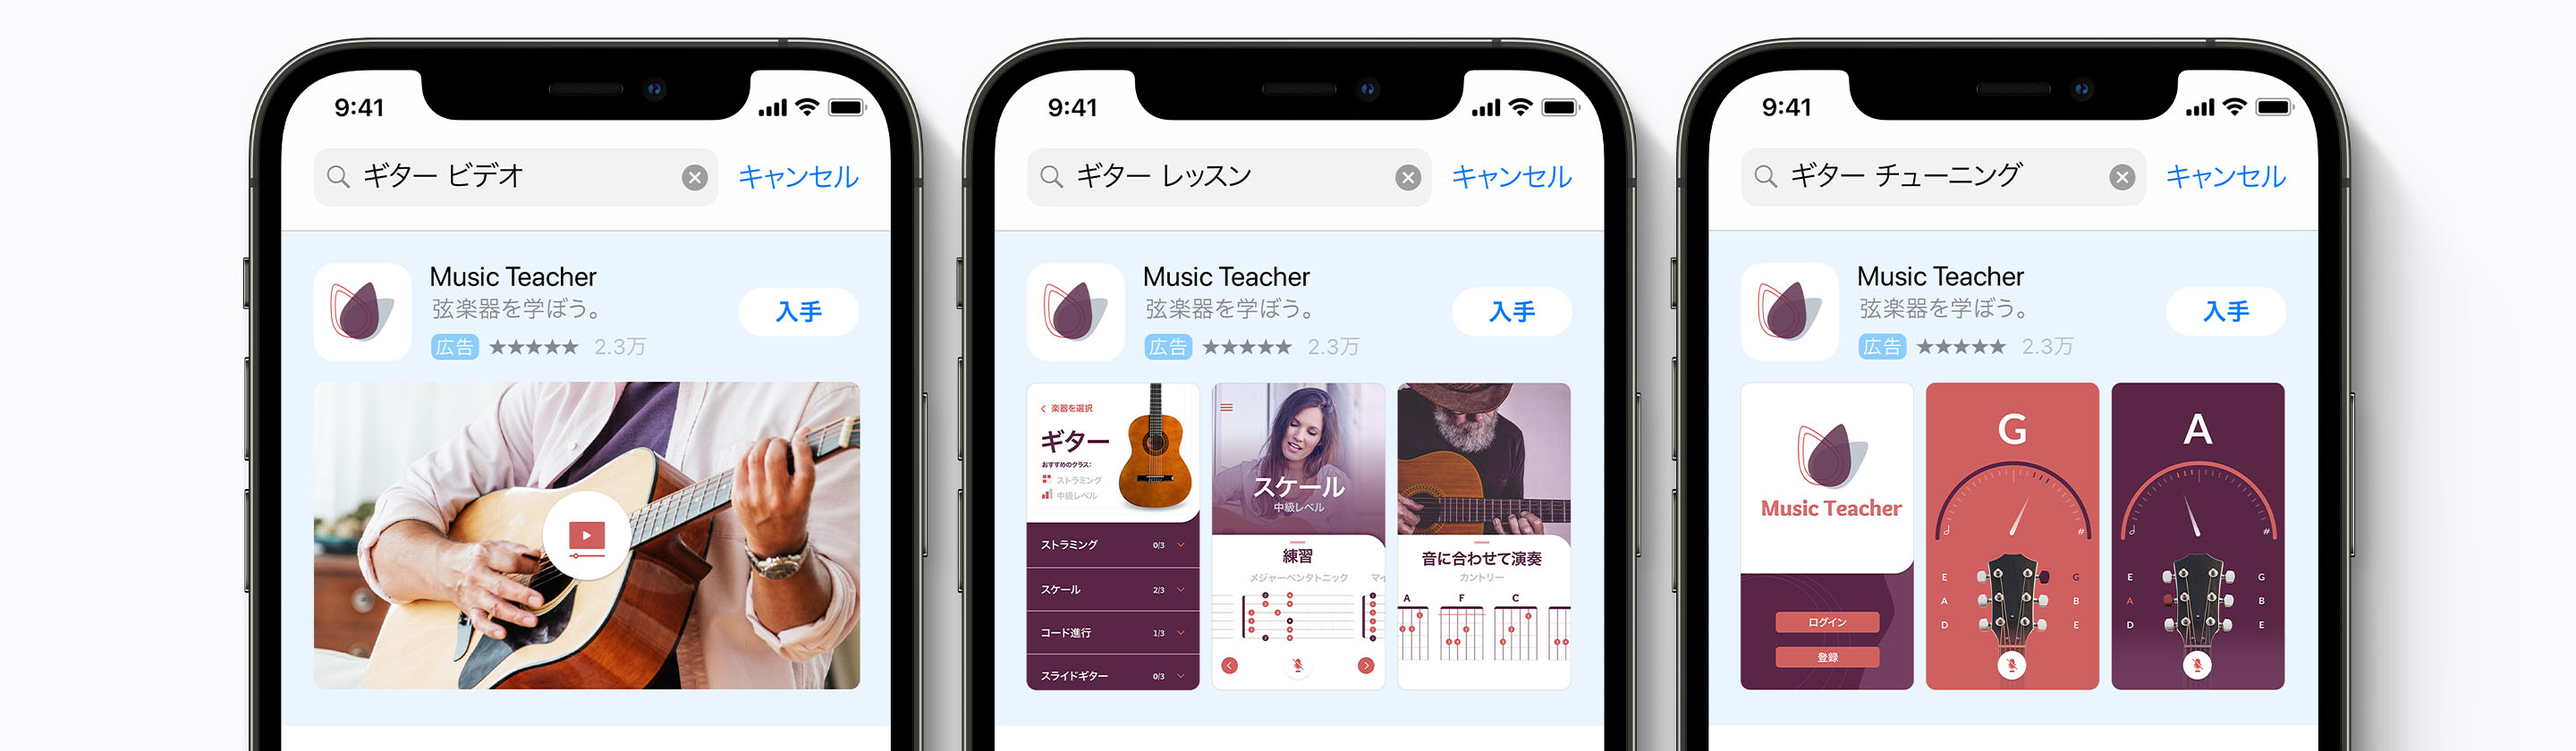 Search resultsキャンペーン向けのCreative Sets広告バリエーションの例